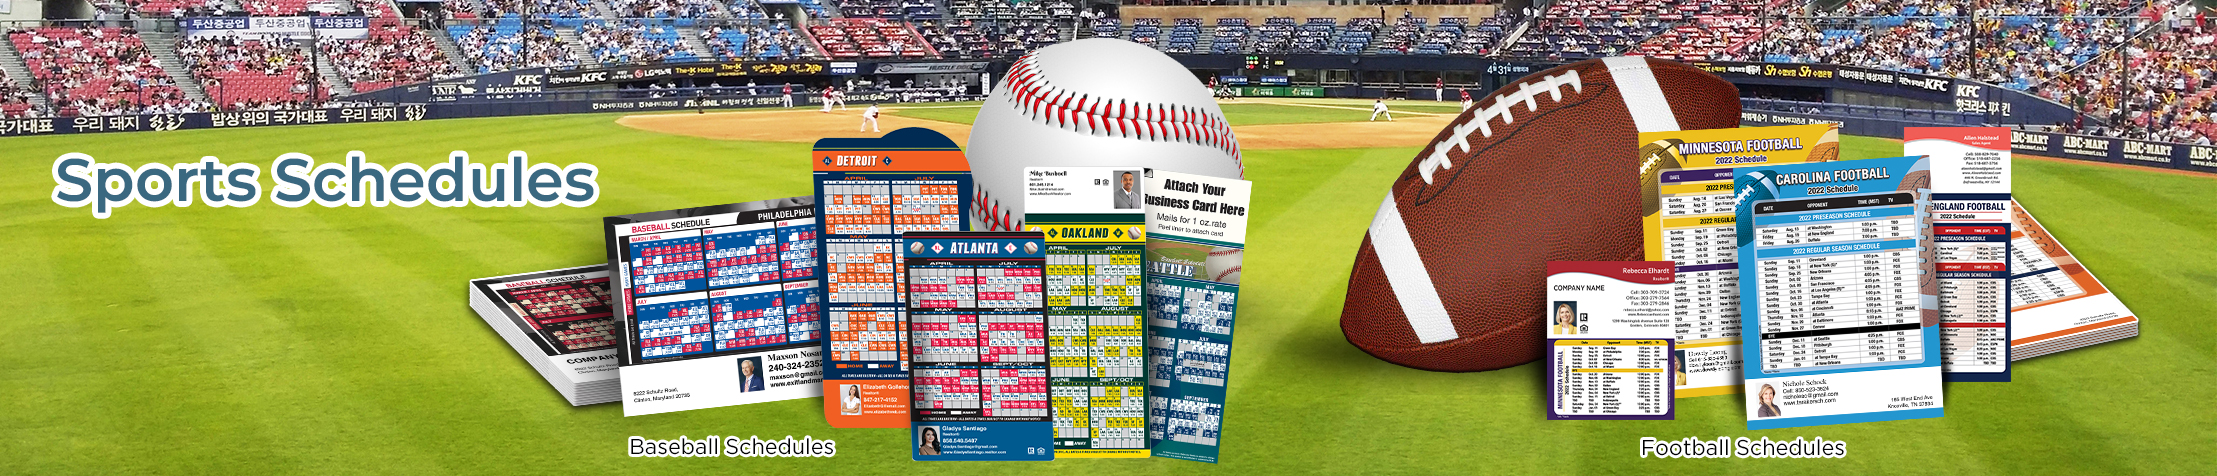 Assit2Sell Real Estate Sports Schedules - Assit2Sell Real Estate custom sports schedule magnets | BestPrintBuy.com